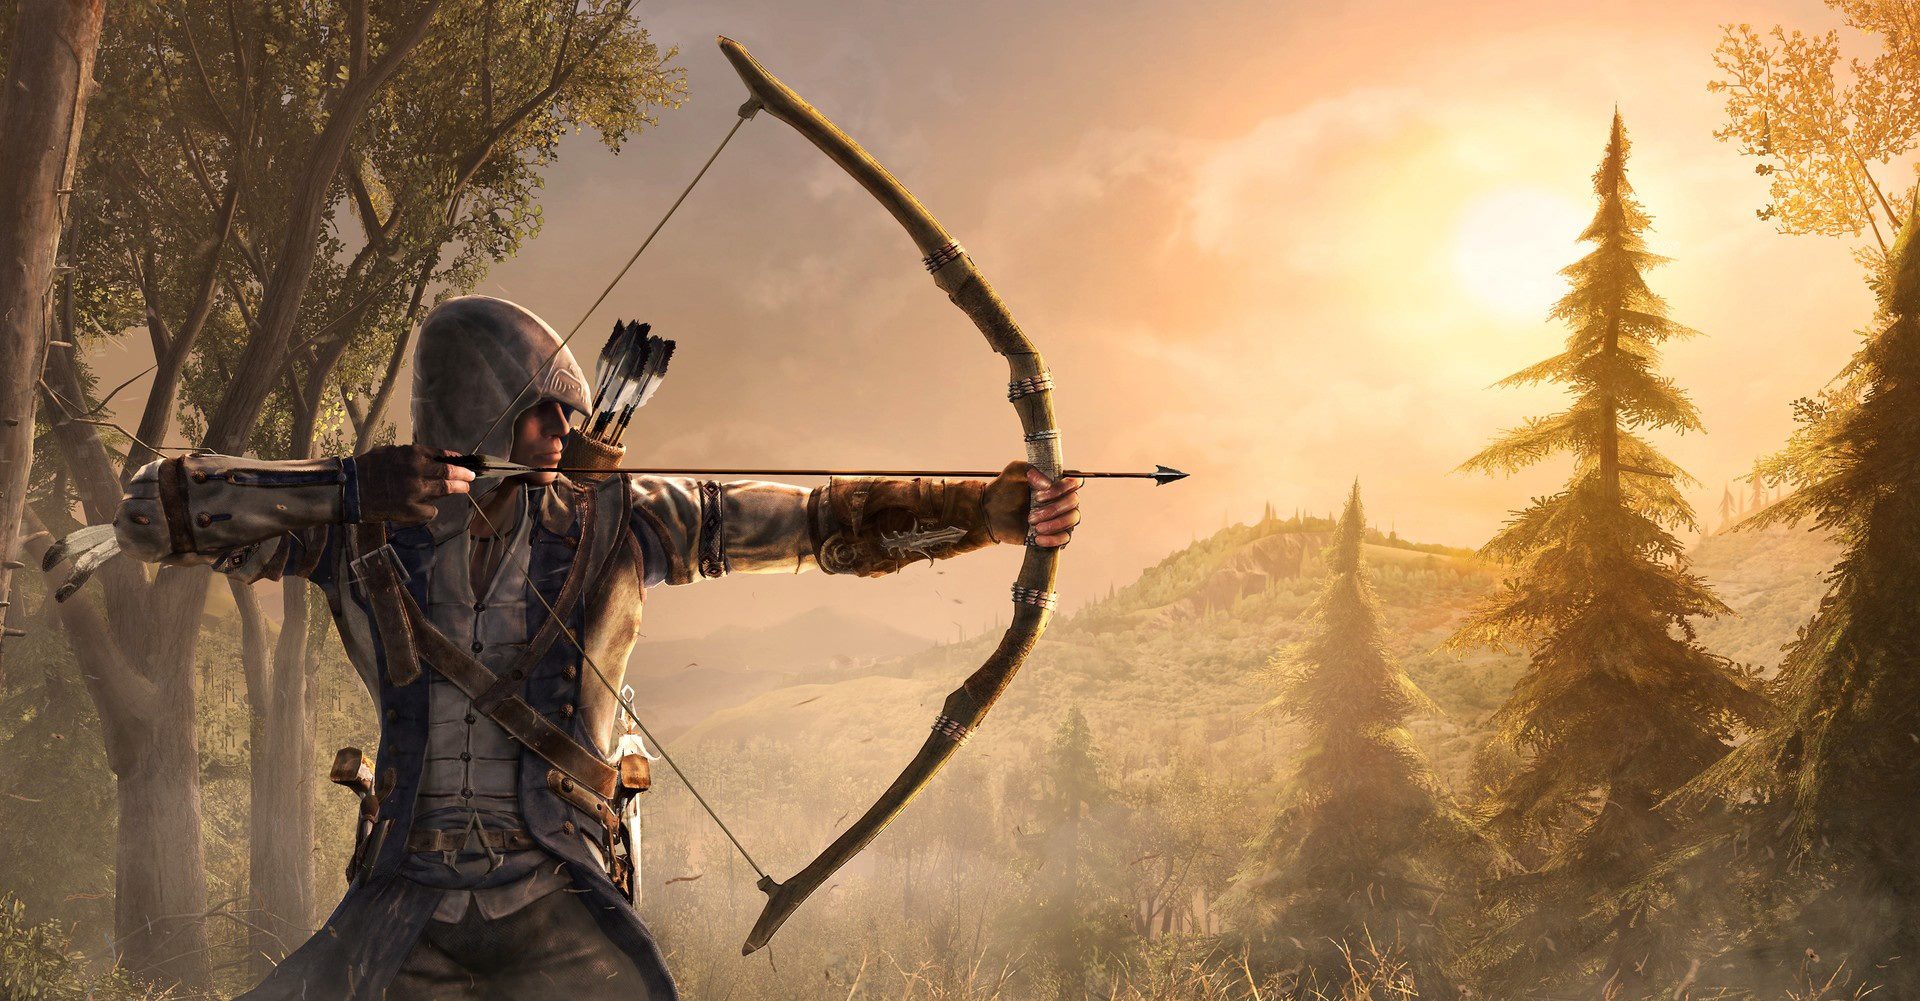 assassin creed 3 trainer free for pc